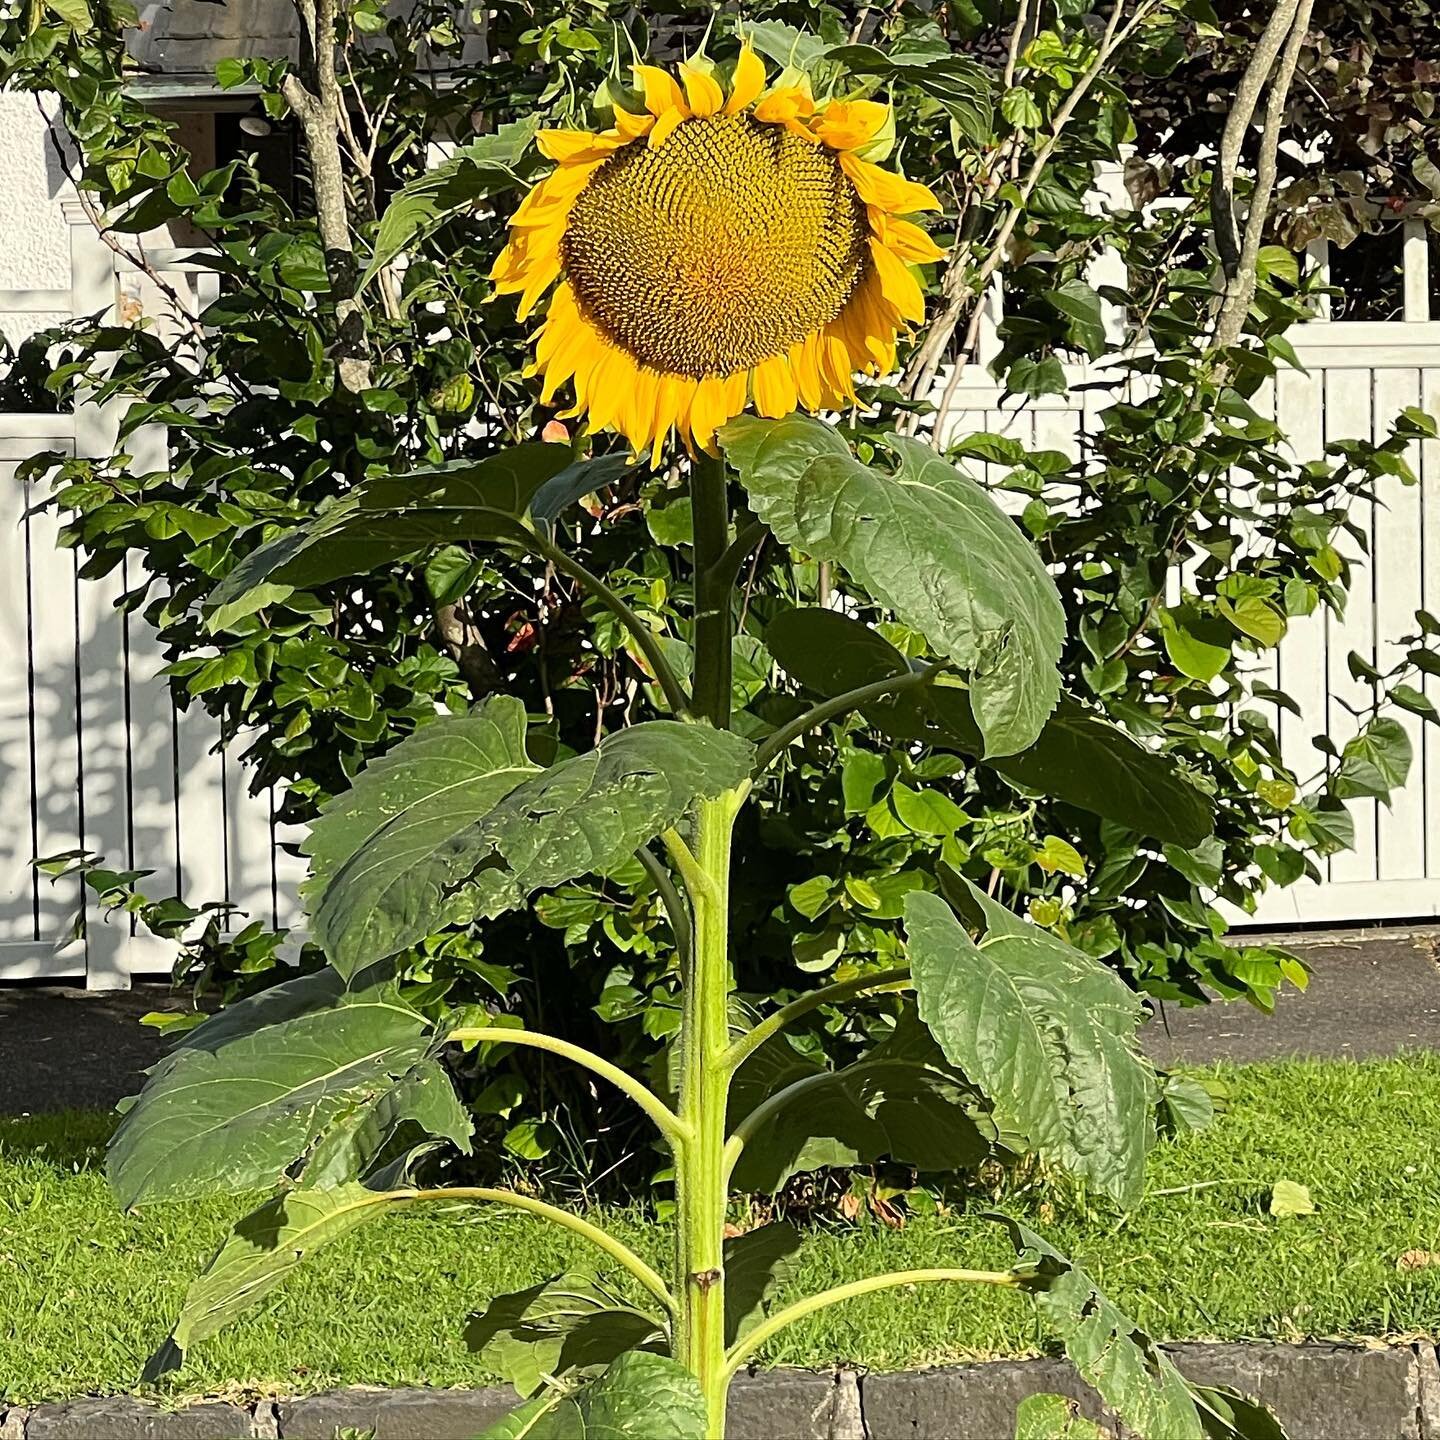 I dunno&hellip; this is just kind of perfect to me. #sunflower #sunflowers🌻  #perfect